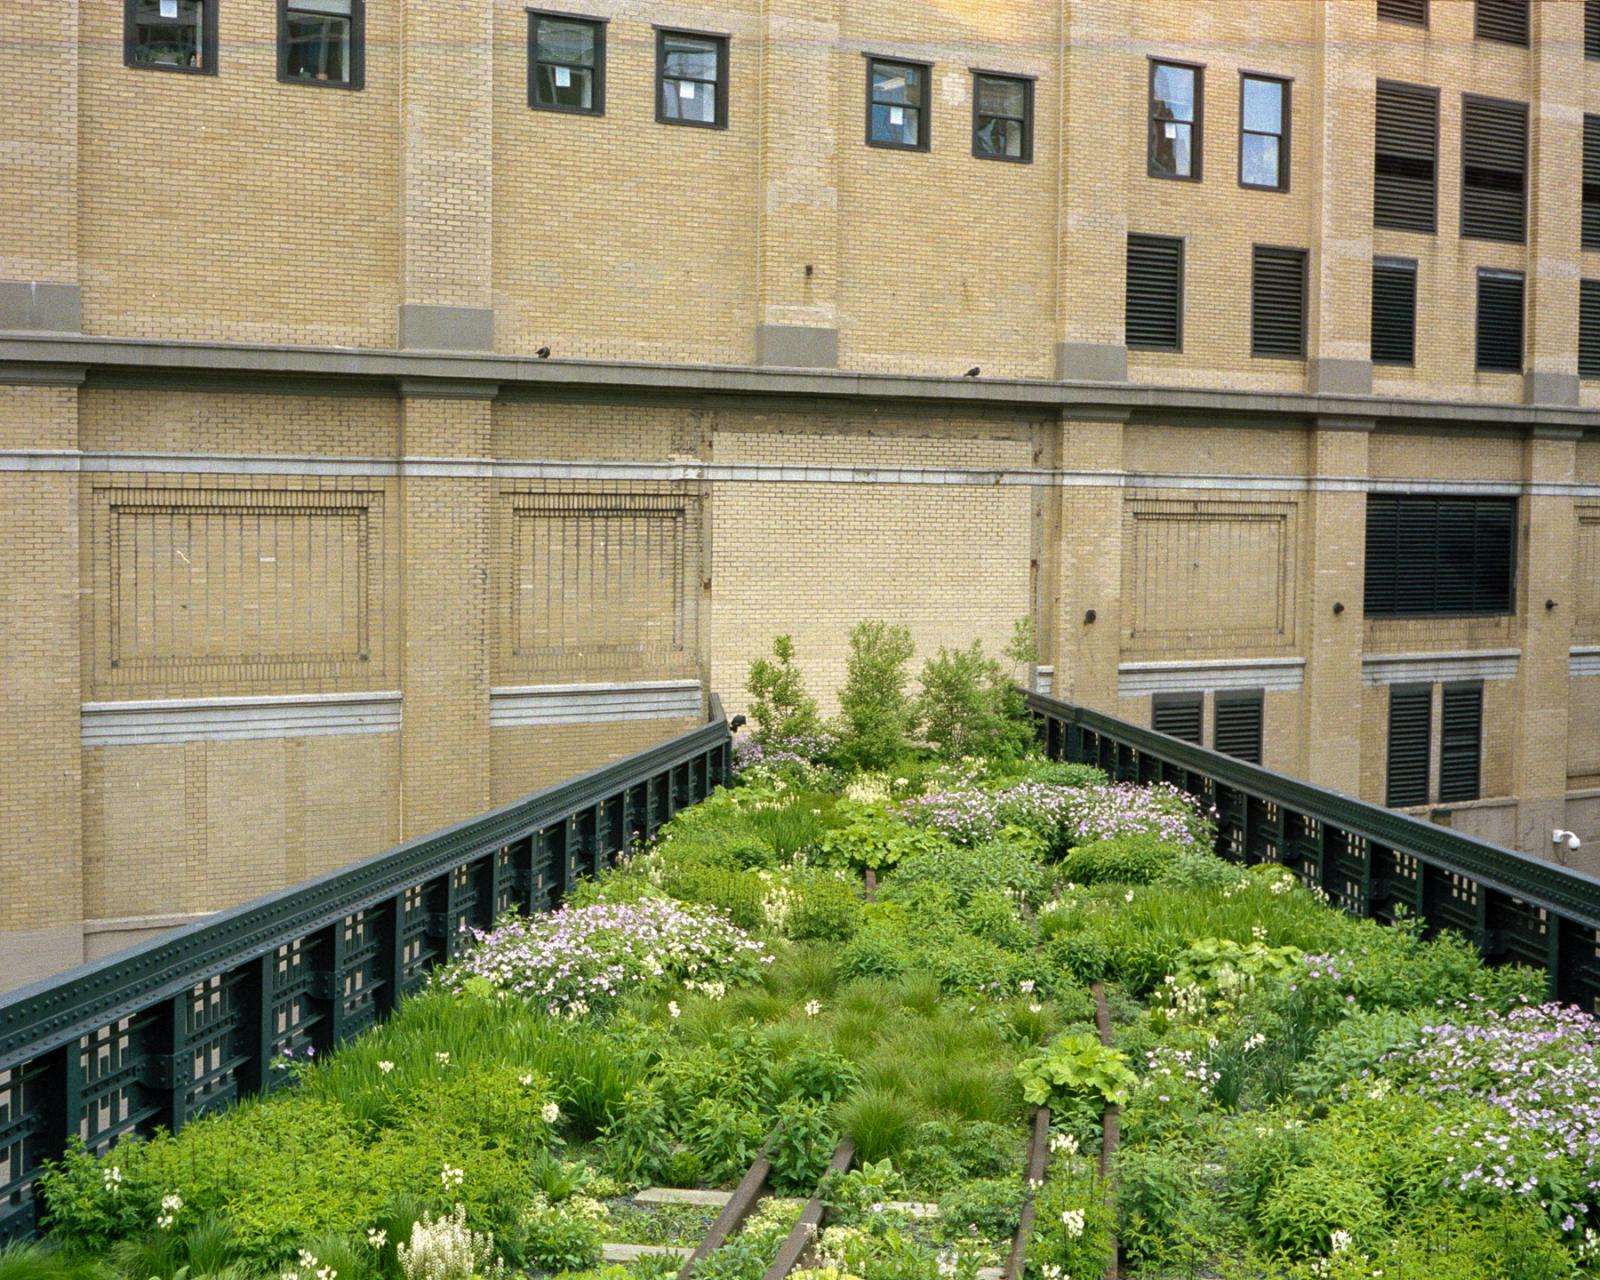 Image from Aesthetic - The High Line, Manhattan, NY